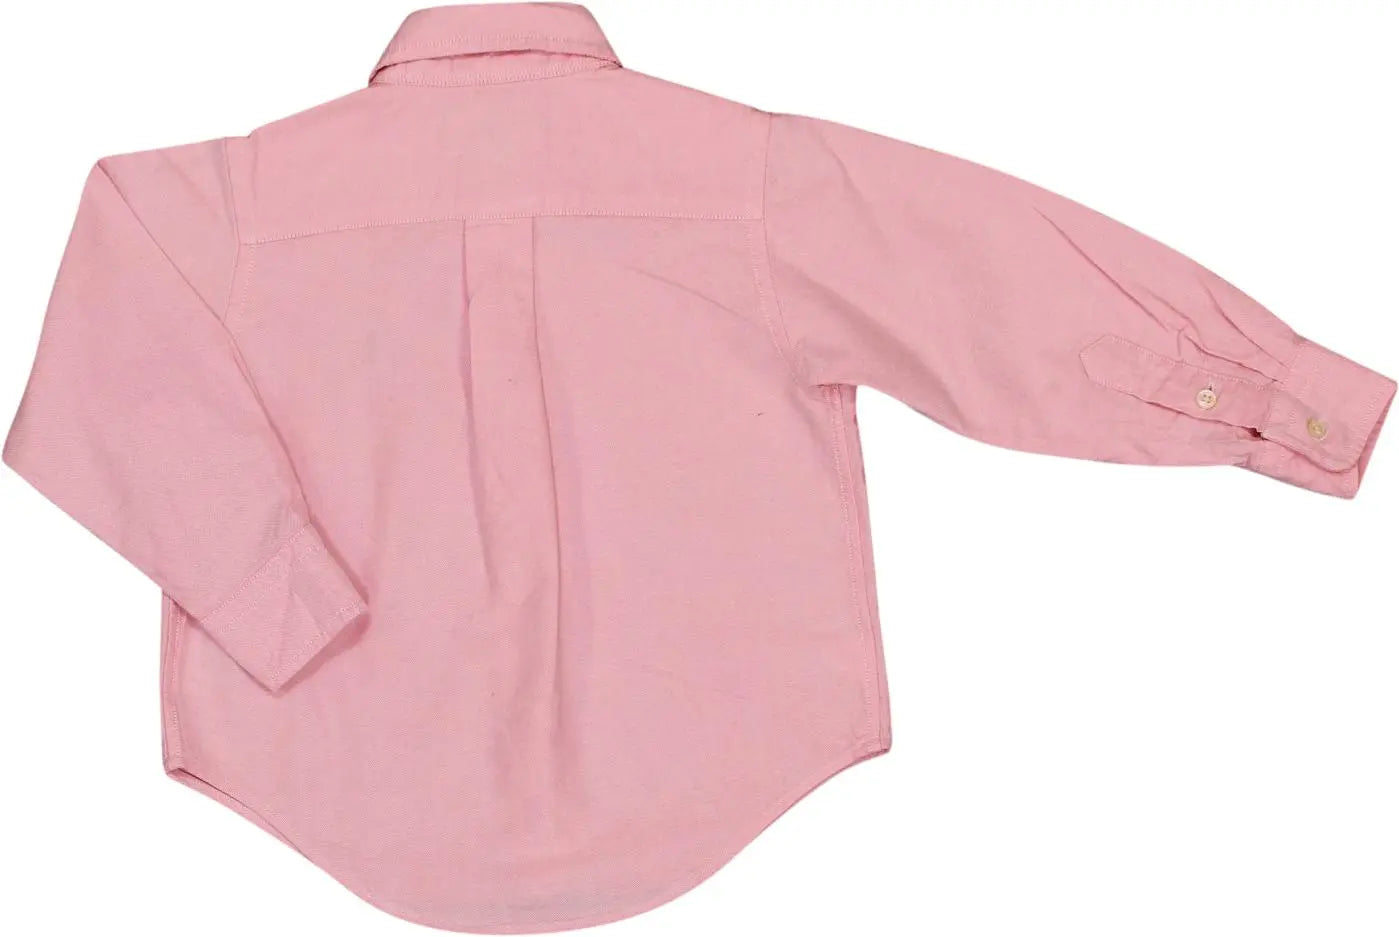 Ralph Lauren - PINK3644- ThriftTale.com - Vintage and second handclothing